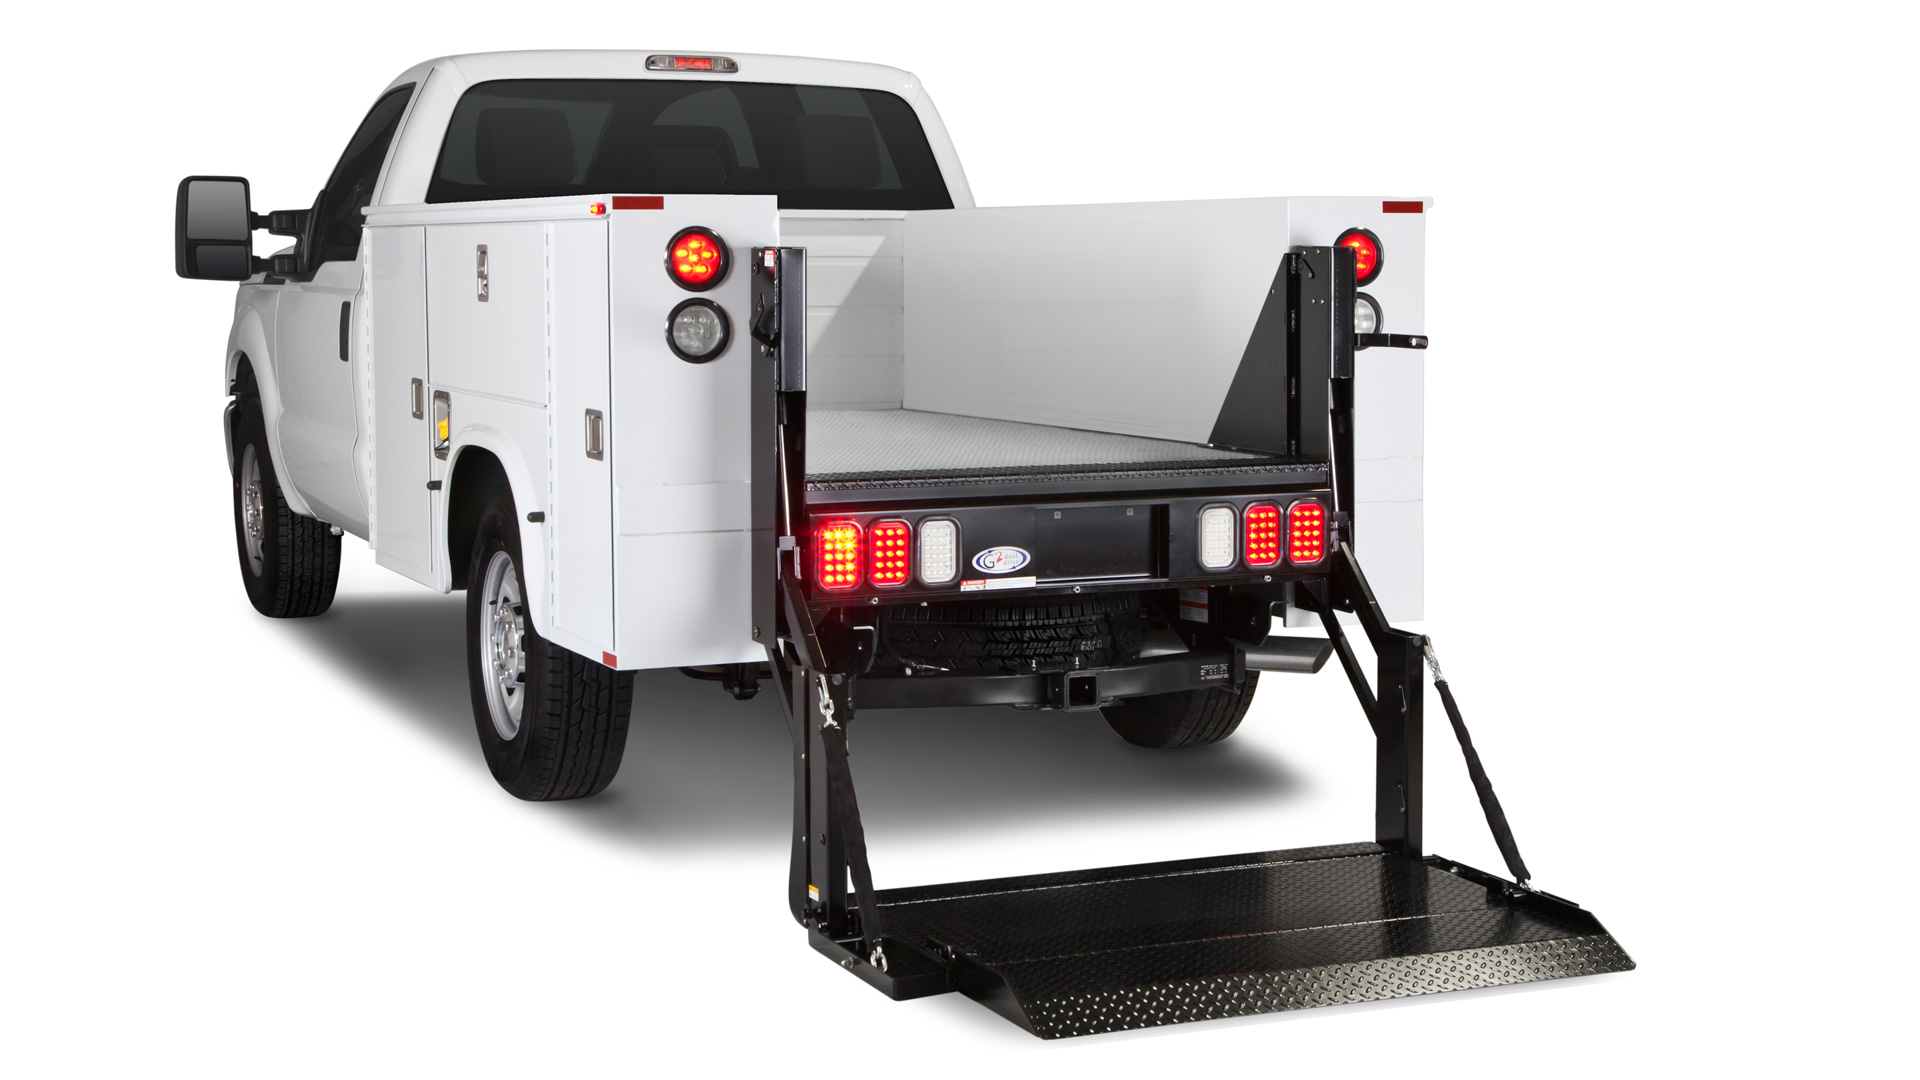 Tommy Gate G2 Series Liftgates For Service And Utility Body Work Trucks